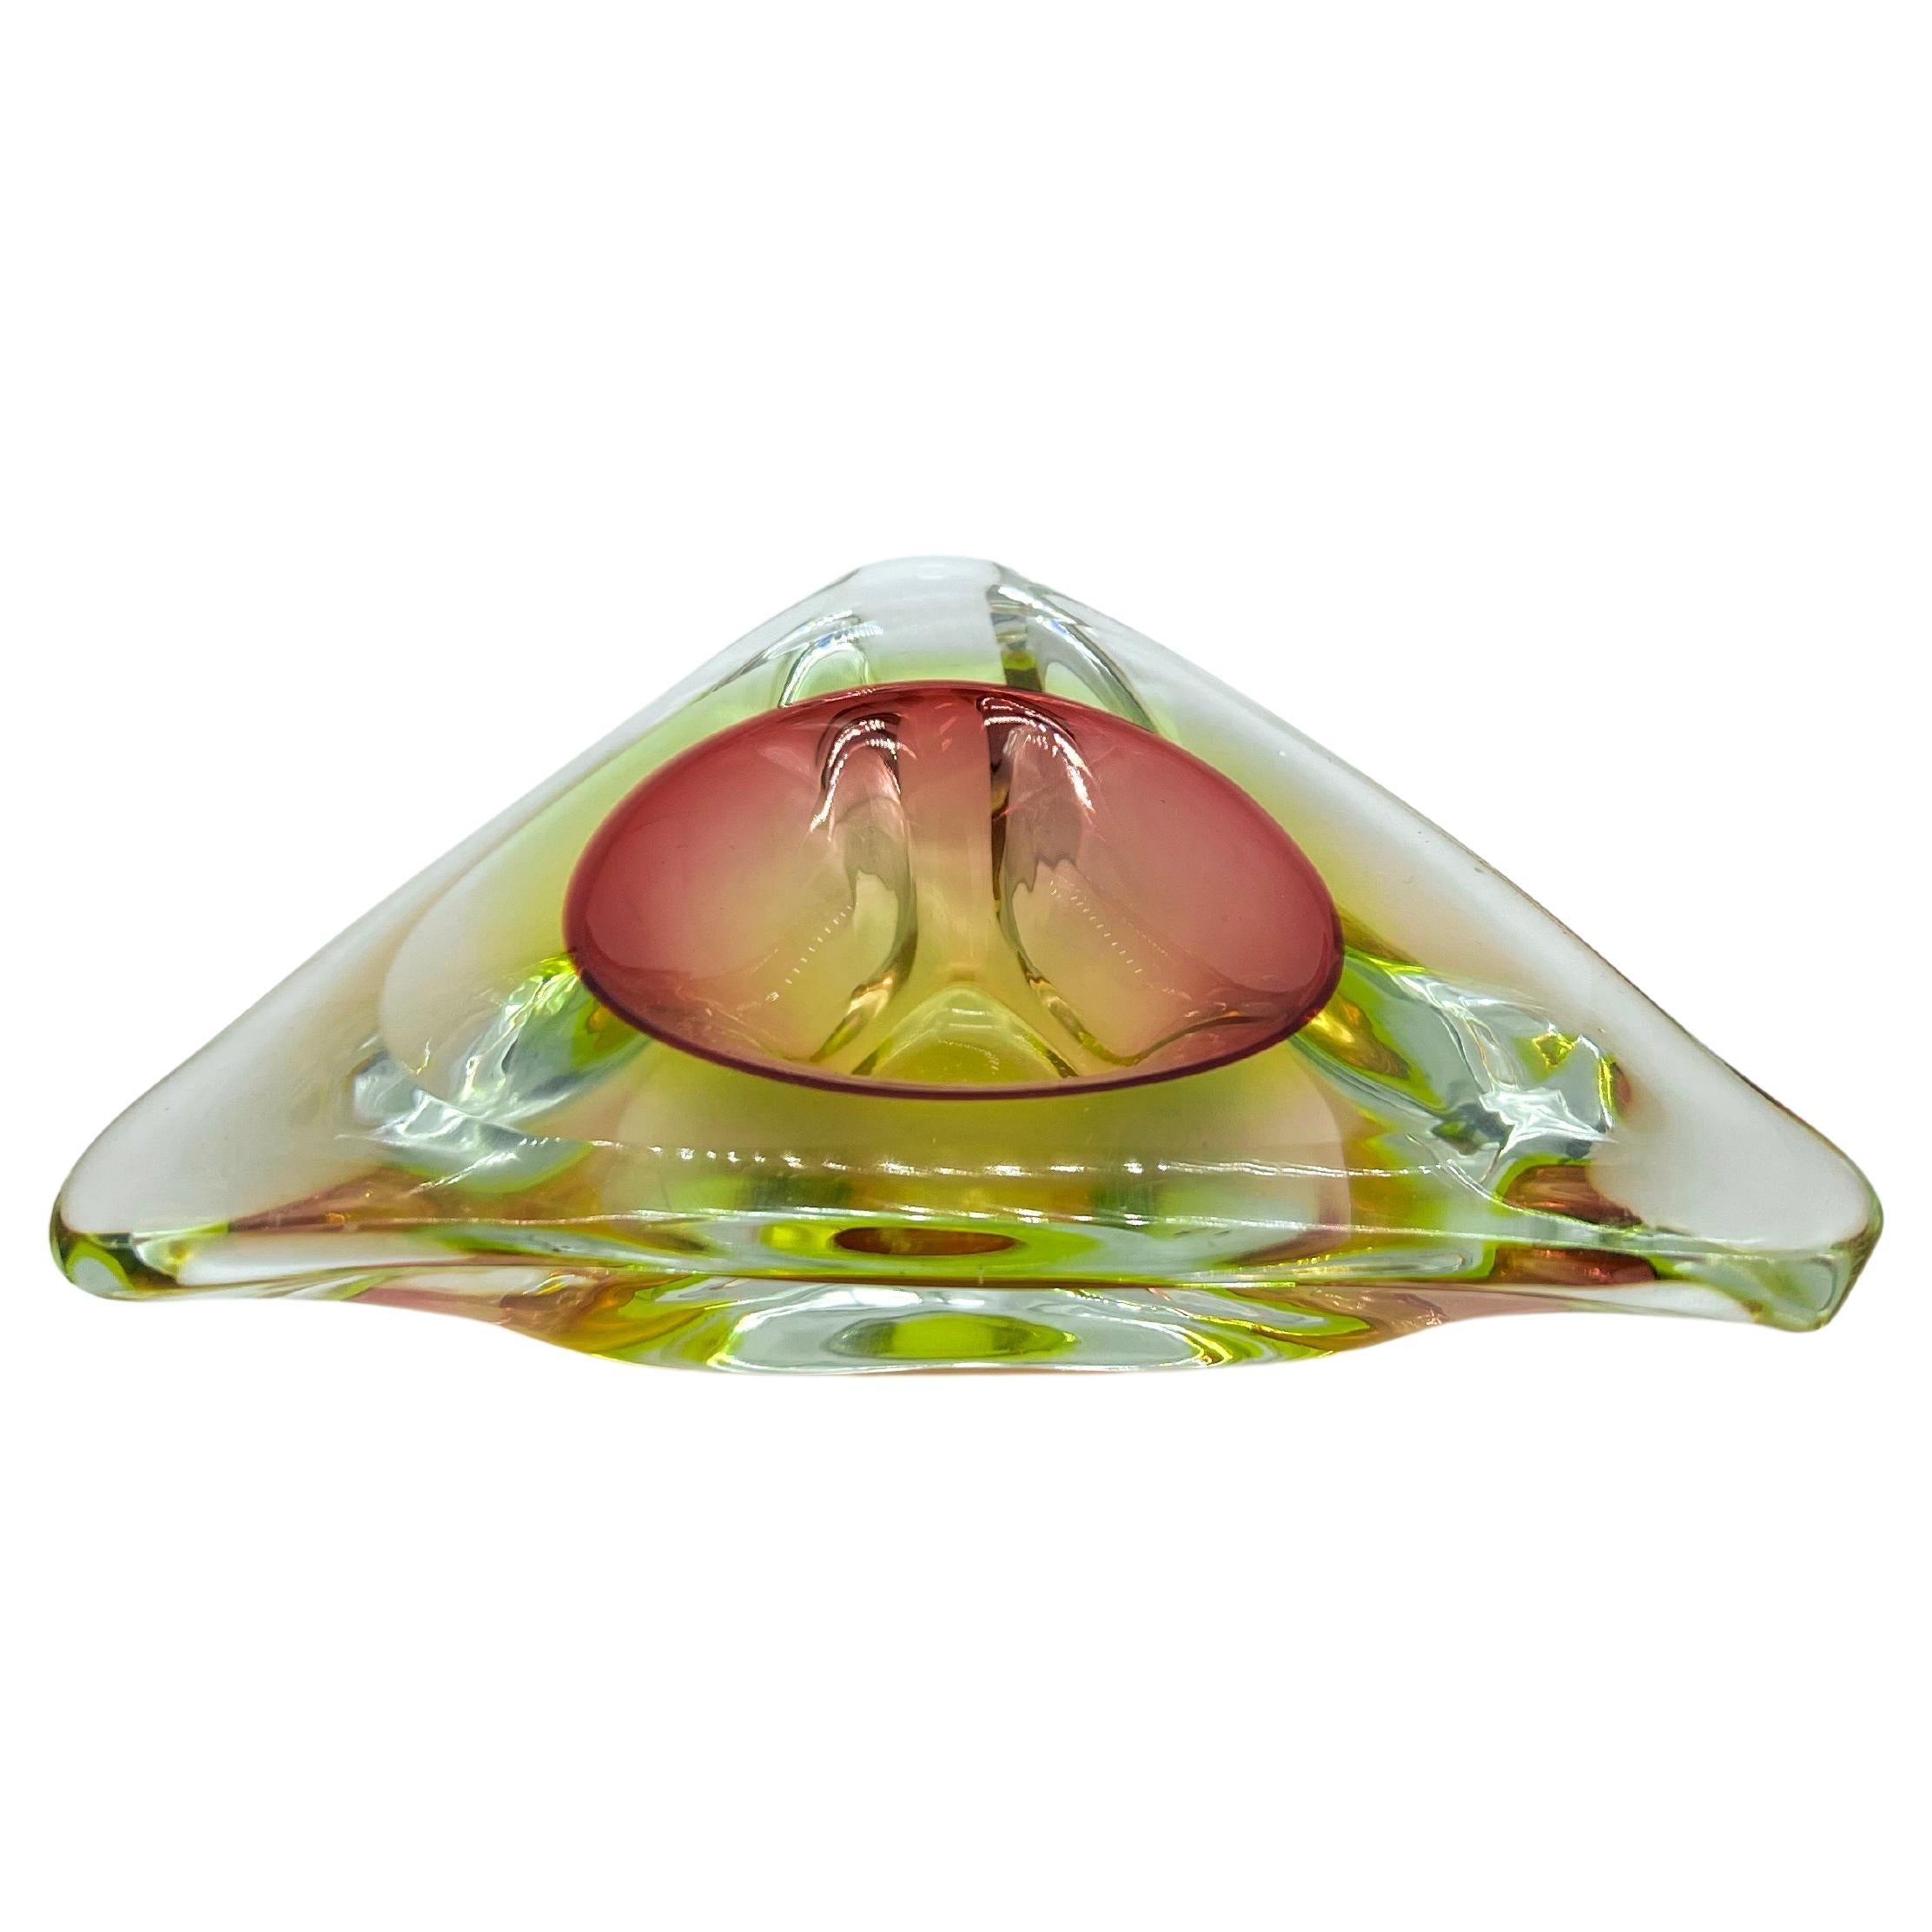 Vintage Triangular Murano Accent Bowl in Red, Green and Yellow "Sommerso" Glass For Sale